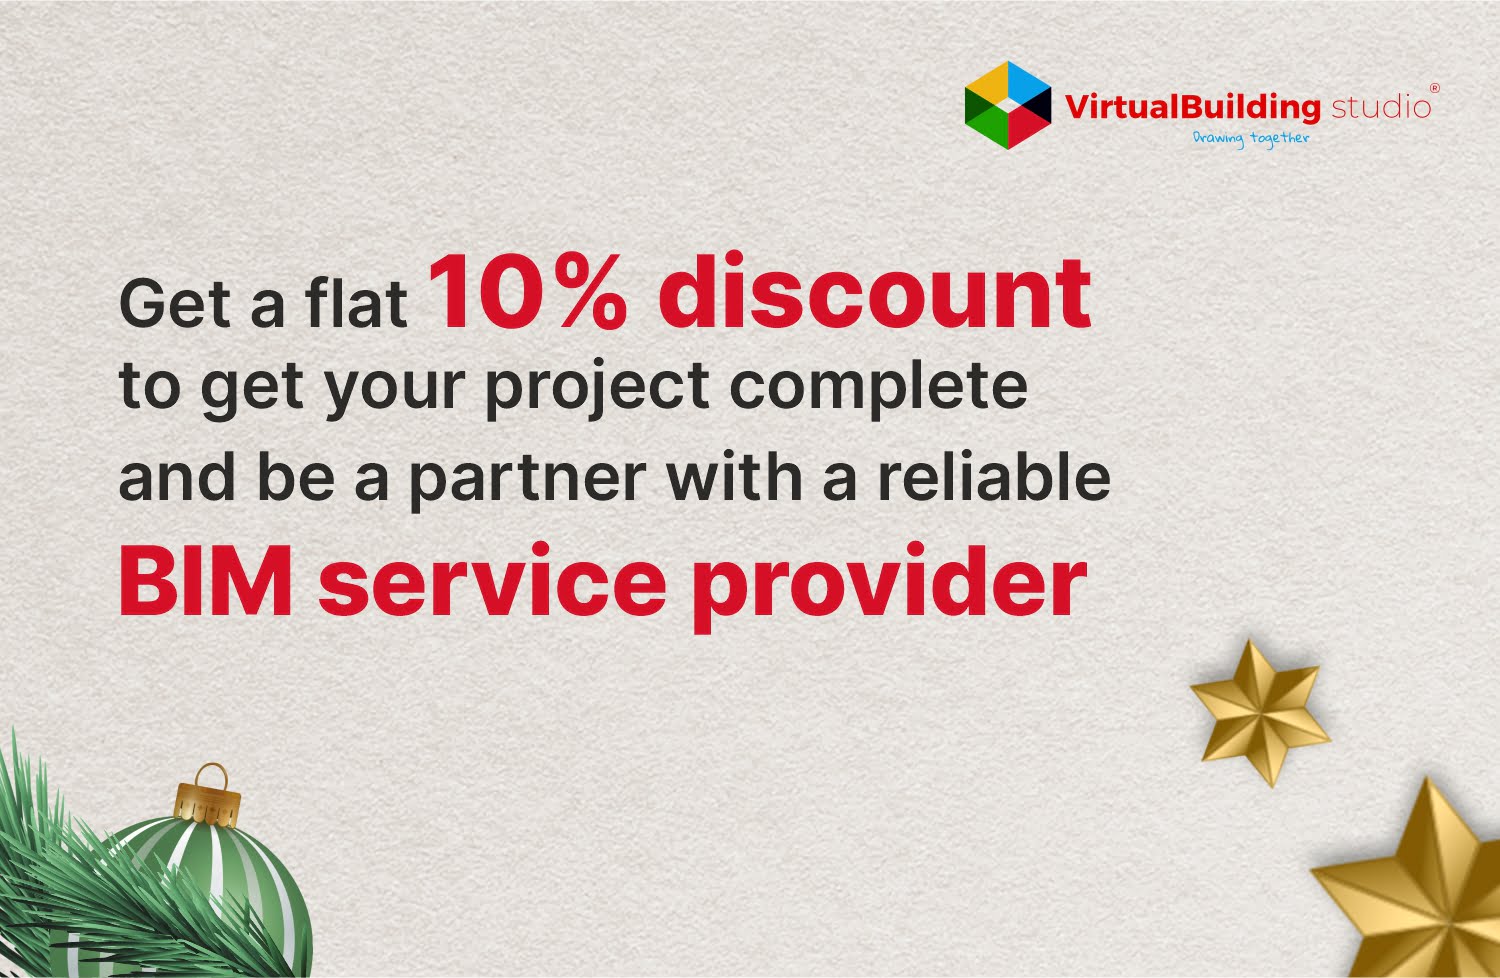 Get a flat 10% discount to get your project completed and be a partner with a reliable BIM service provider